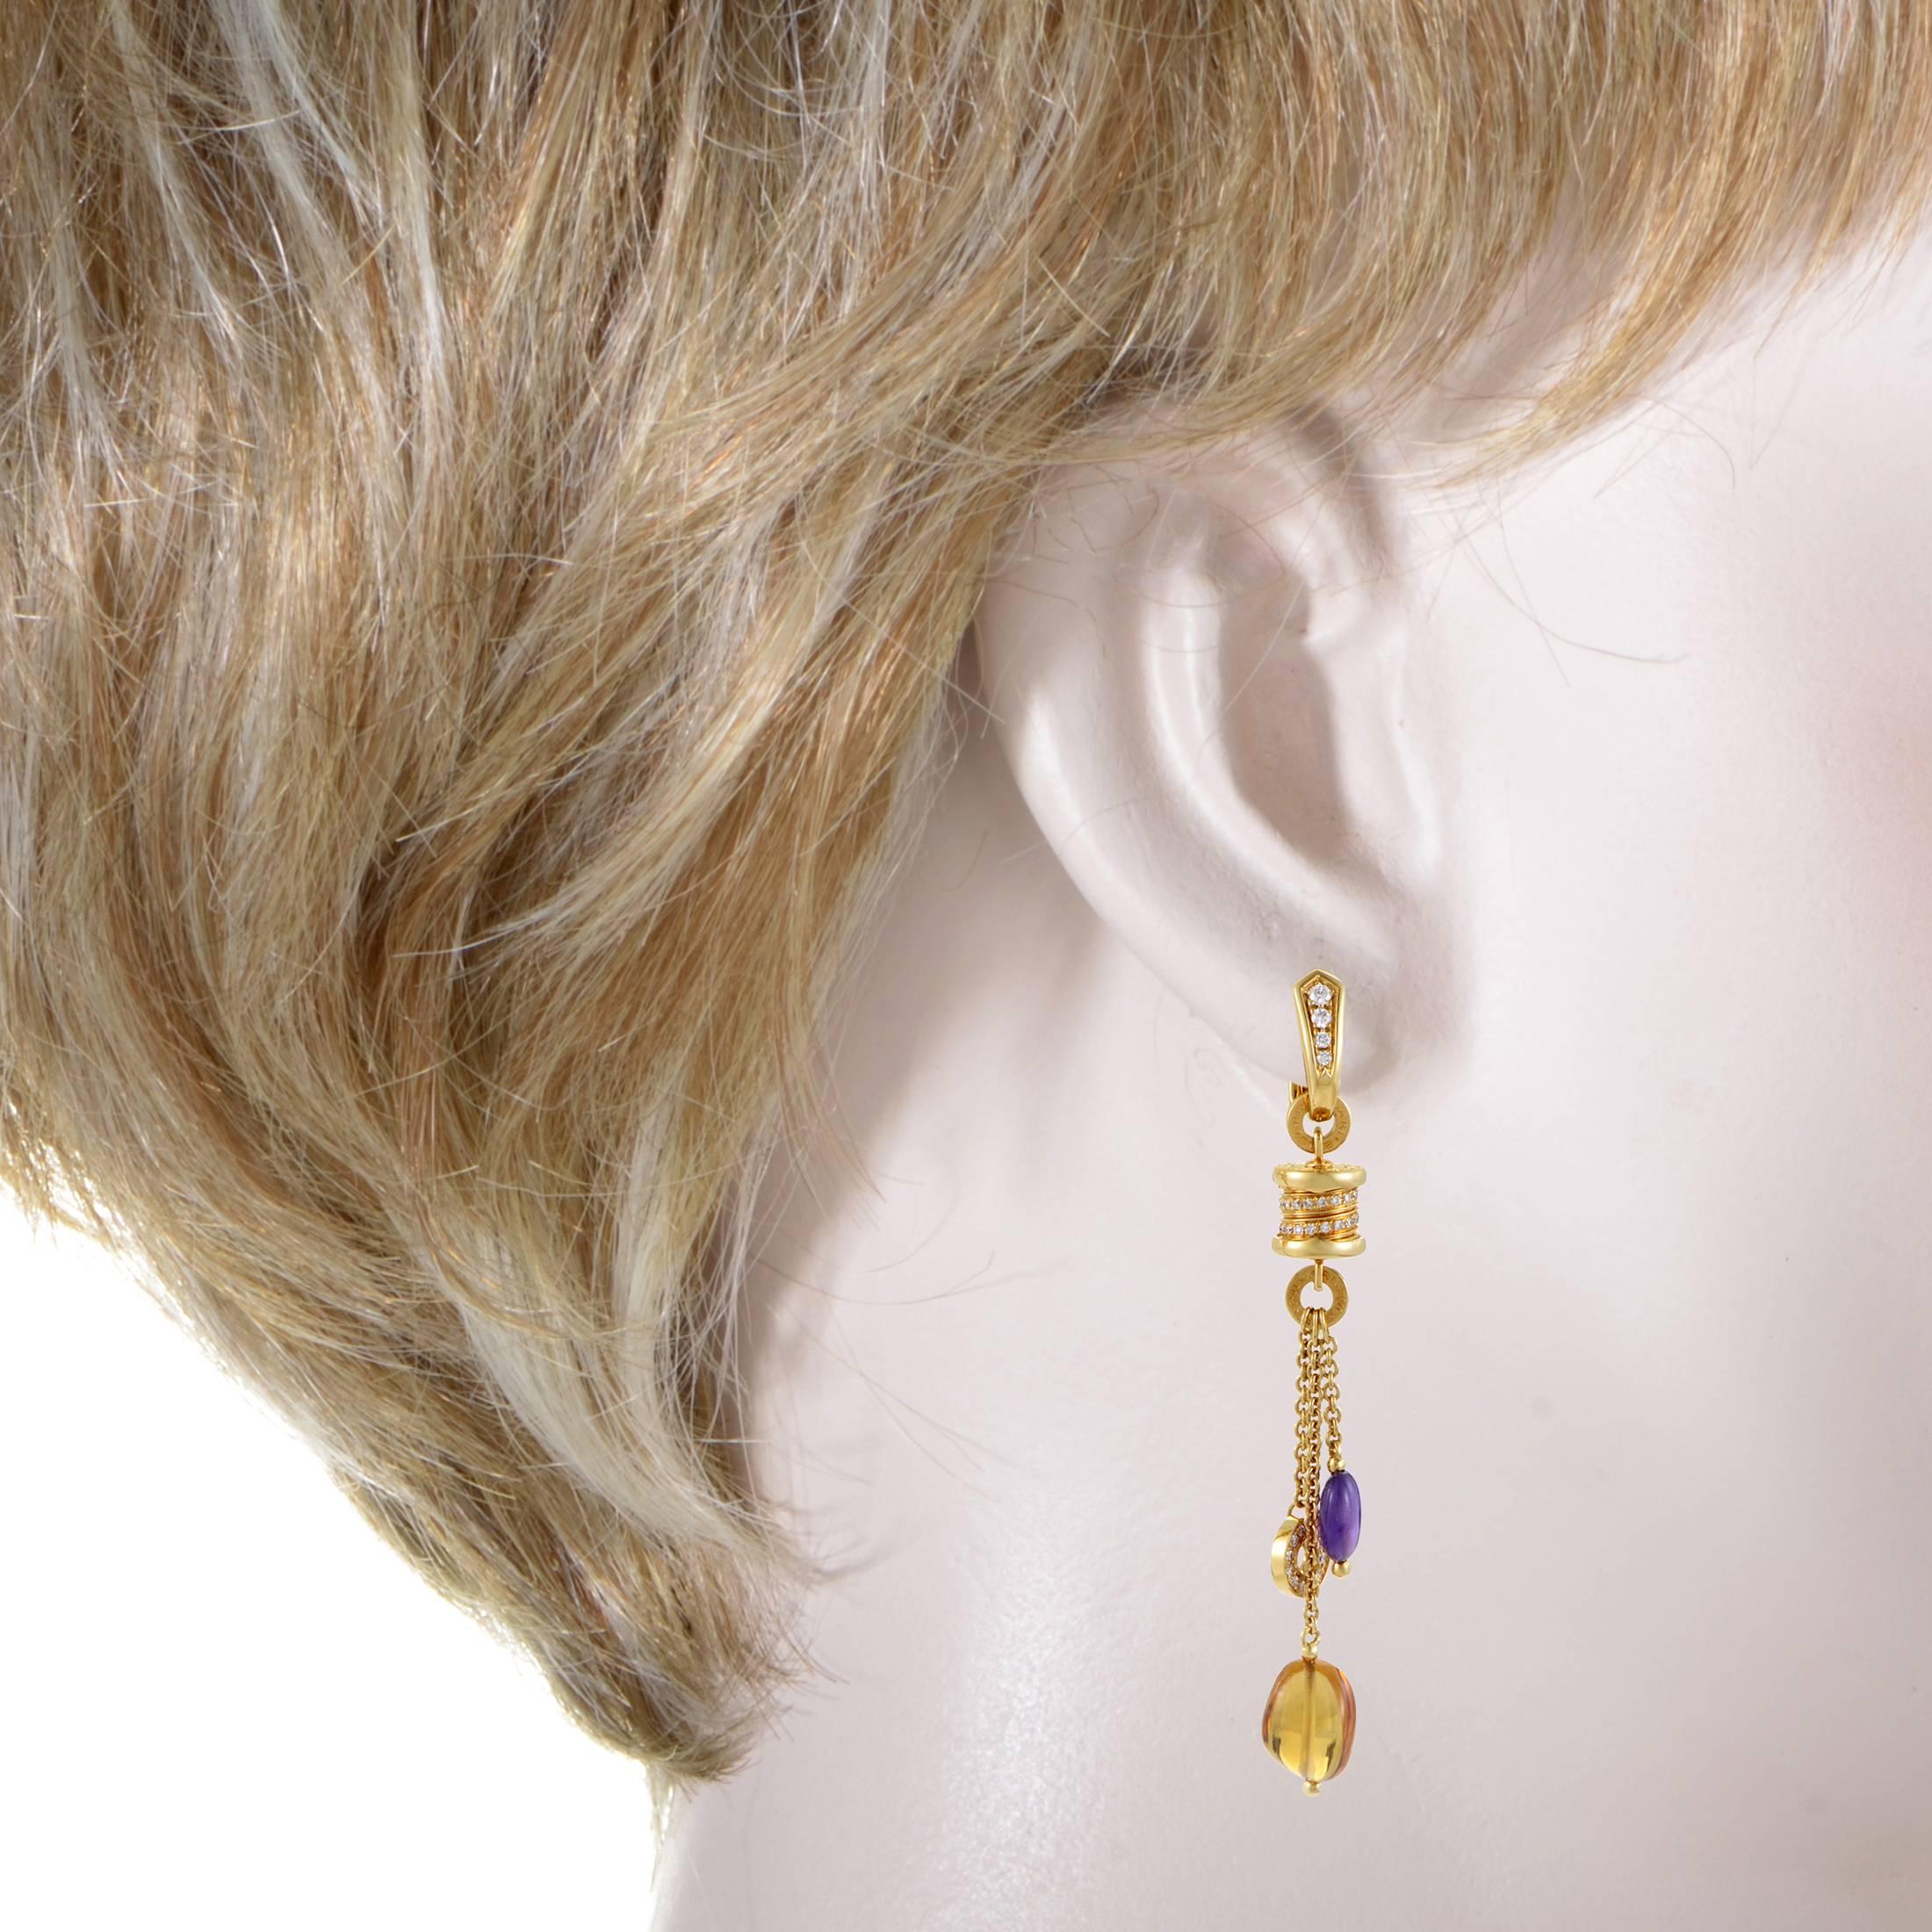 The Bulgari B.Zero1 collection features festive designs that will take your style to the next level. This genuine pair of earrings from the collection are made of 18K yellow gold and are set with diamonds. Lastly, multi-colored gemstones dangle from